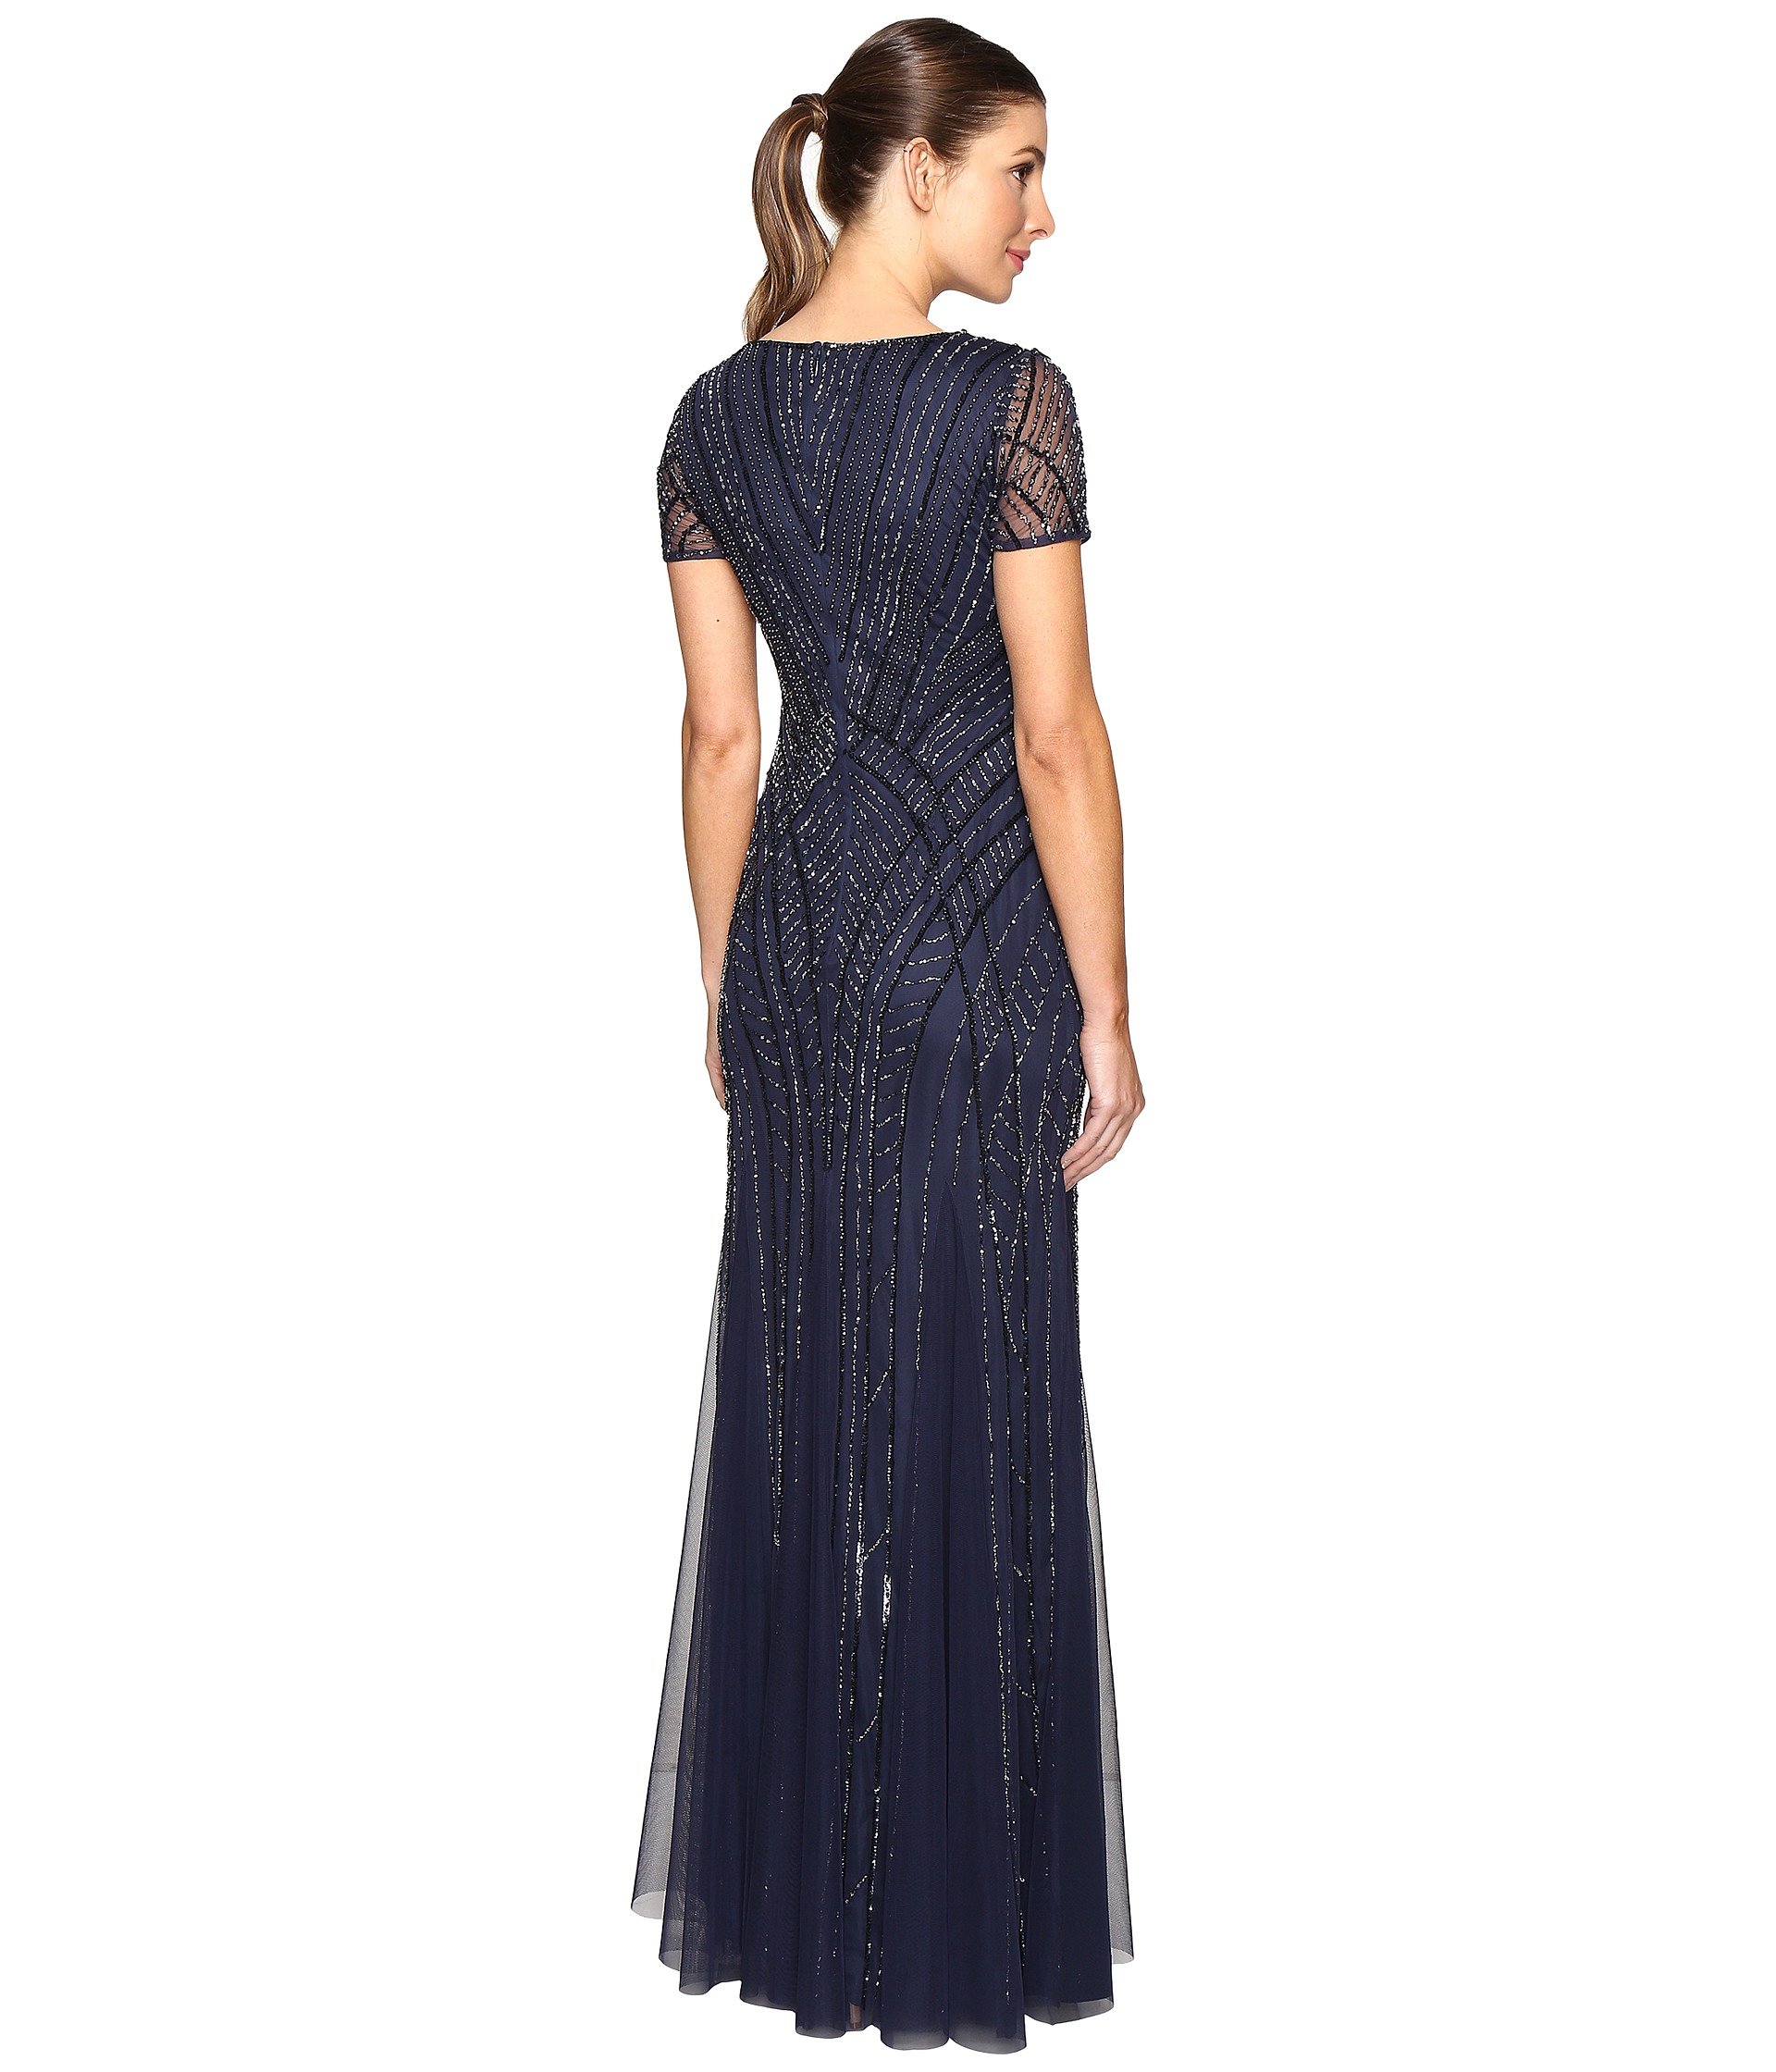 Adrianna Papell Short Sleeve Illusion Neck Beaded Gown at Zappos.com